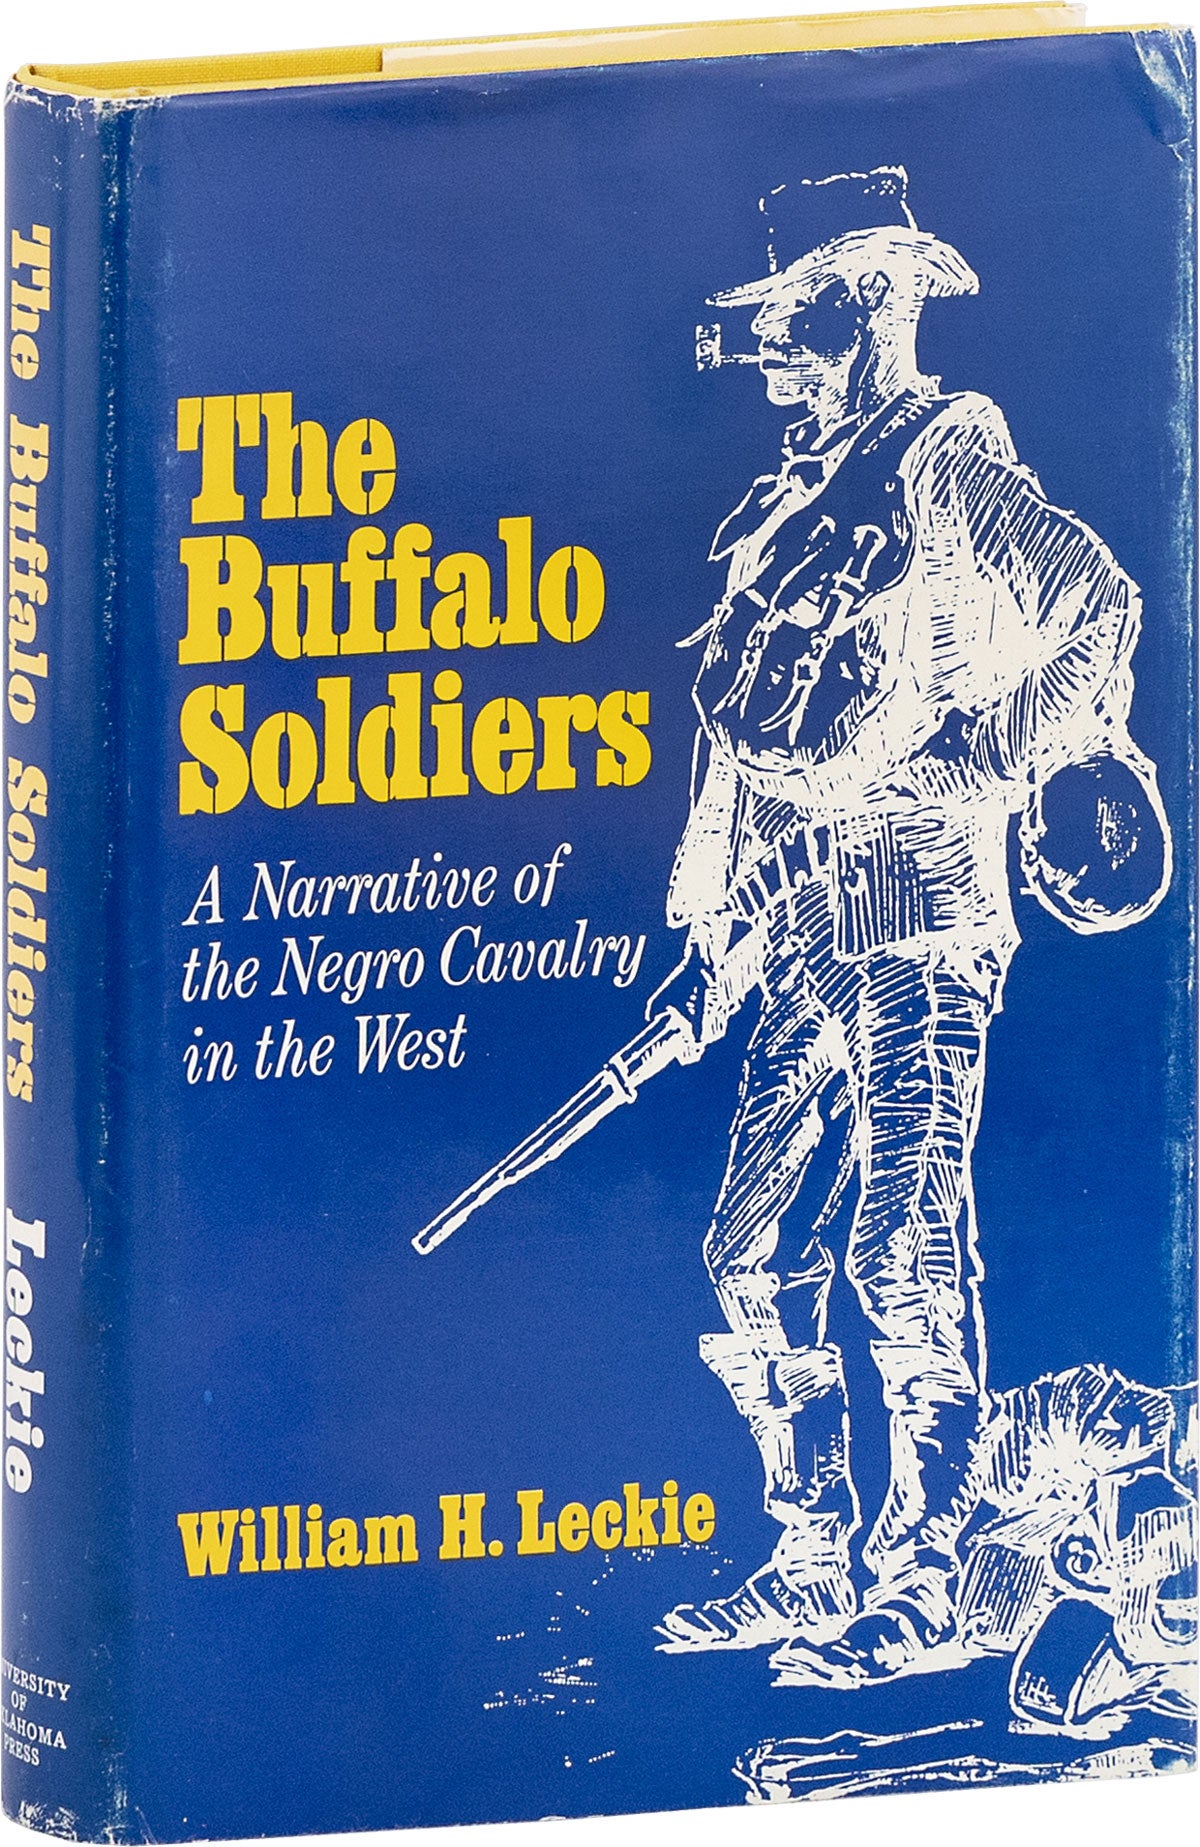 [Item #80740] The Buffalo Soldiers; A Narrative of The Negro Cavalry in The West. AFRICAN AMERICAN, William H. LECKIE, WESTERN AMERICANA.